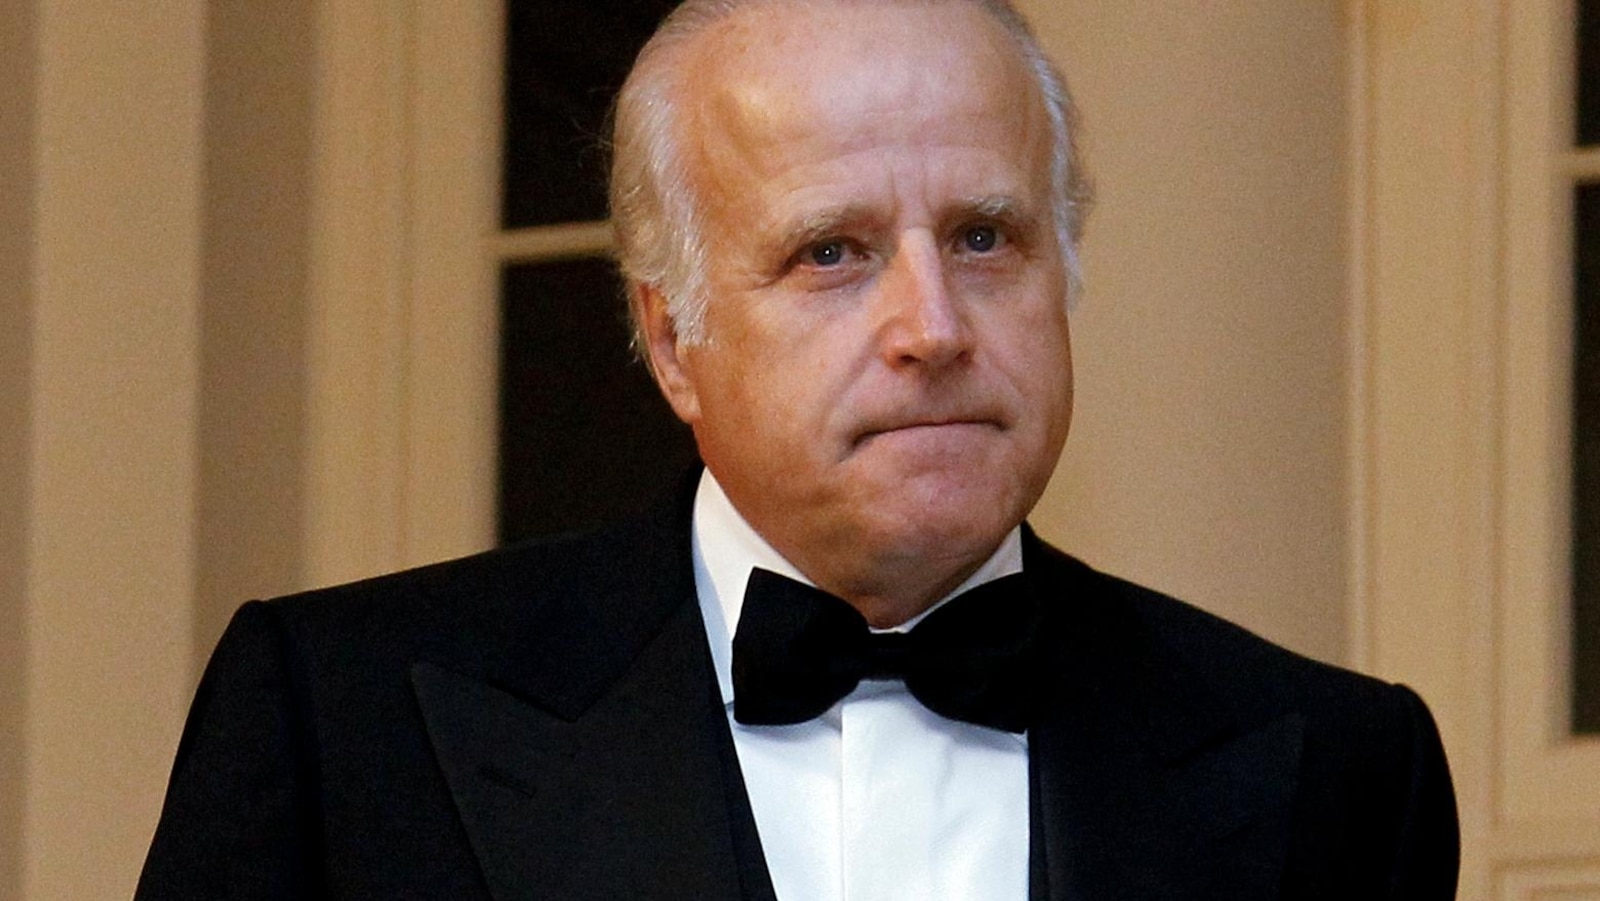 James Biden, brother of President Joe Biden, consents to a private interview with House Republicans conducting an investigation on the president